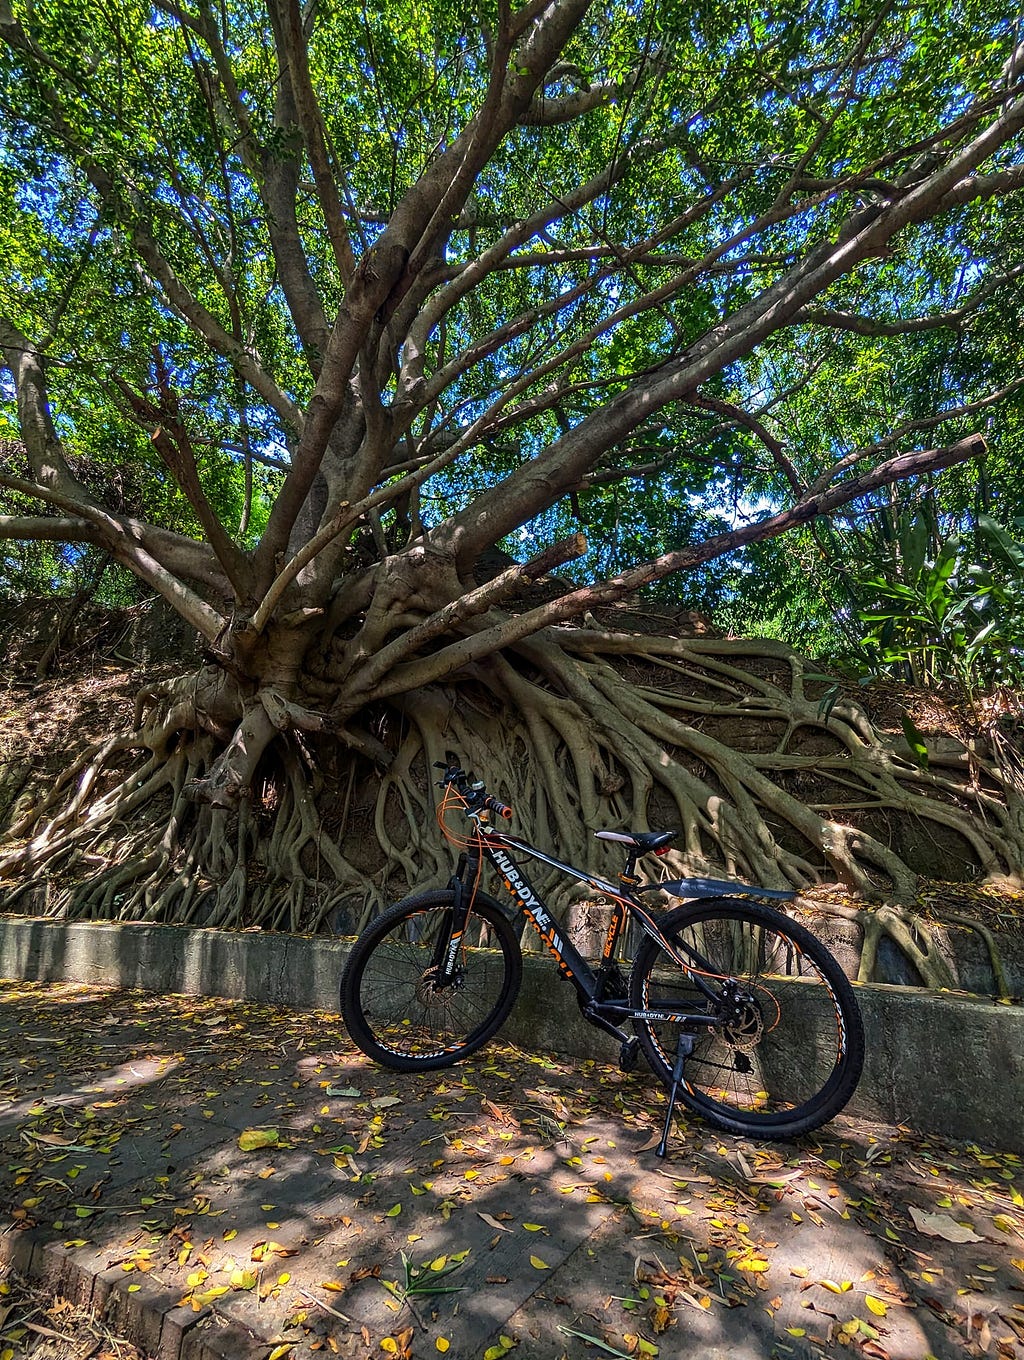 A rather large tree with exposed roots. My bike is next to the tree.